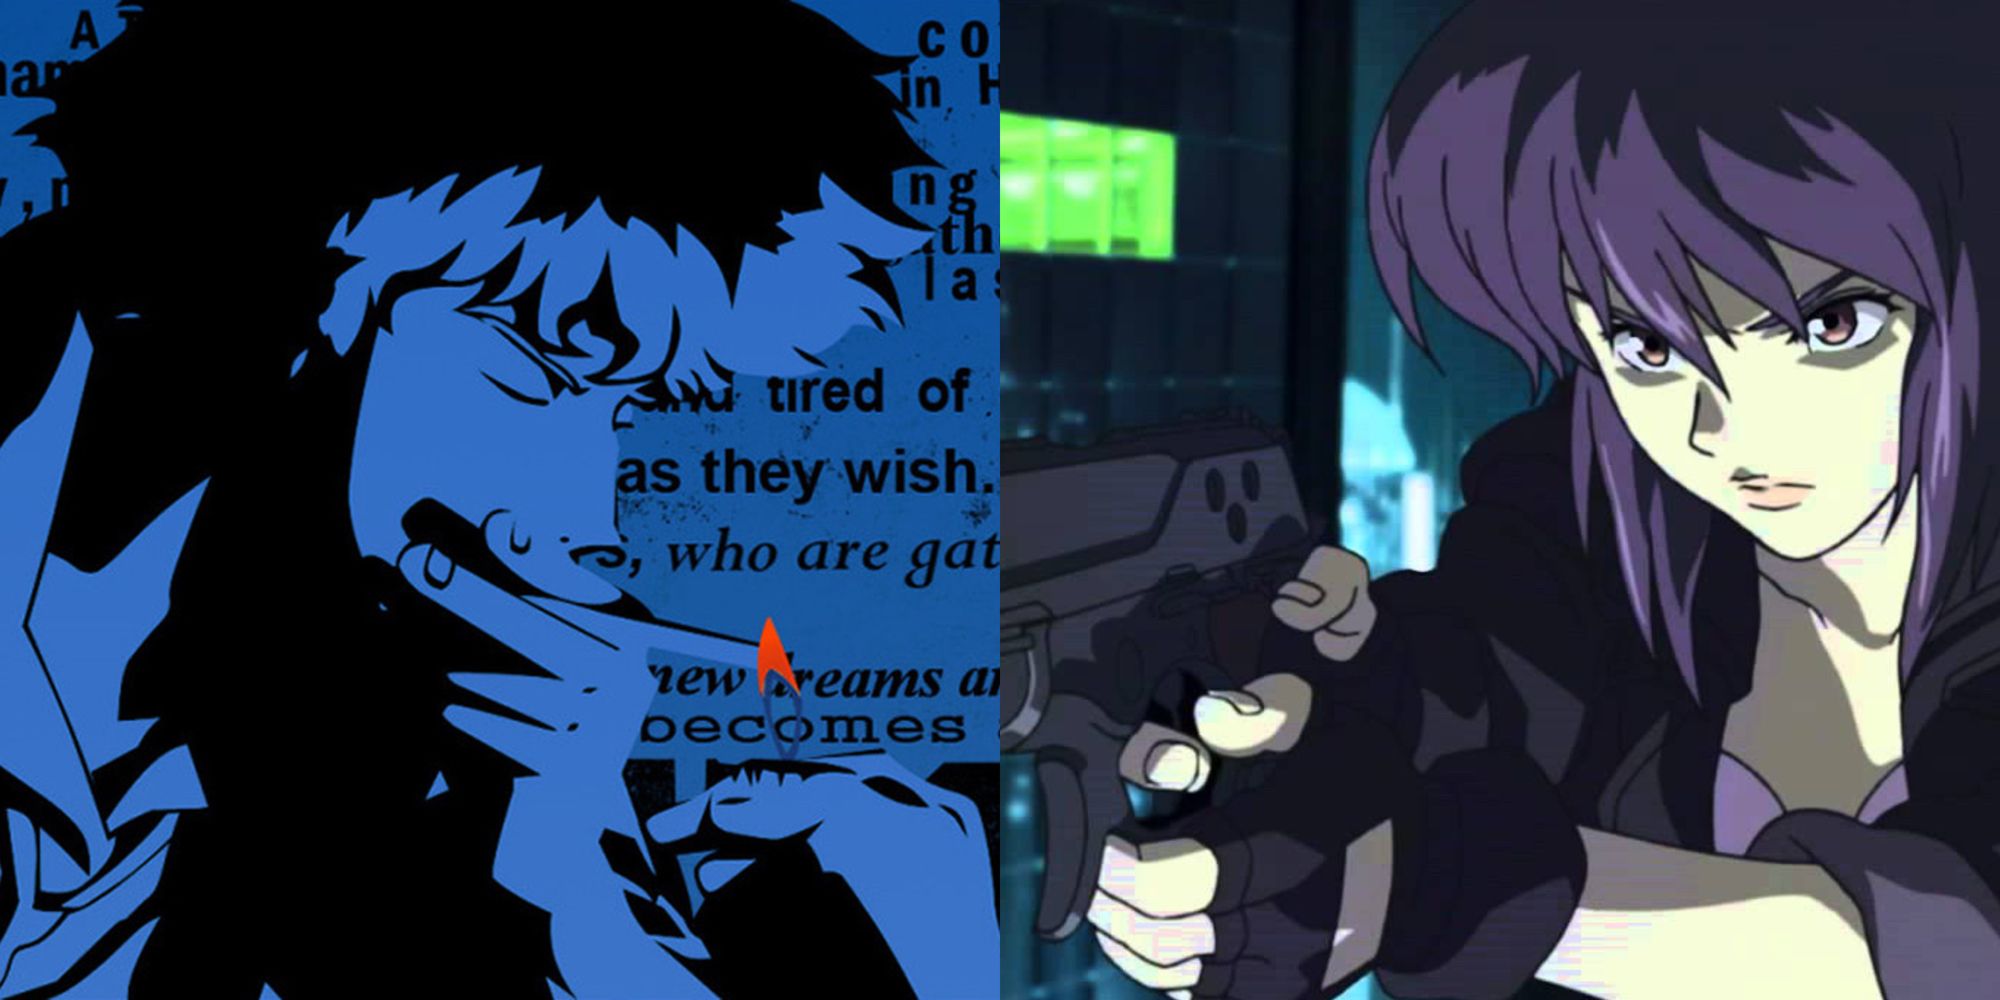 Cowboy Bebop and Stand Alone Complex Stills from their openings